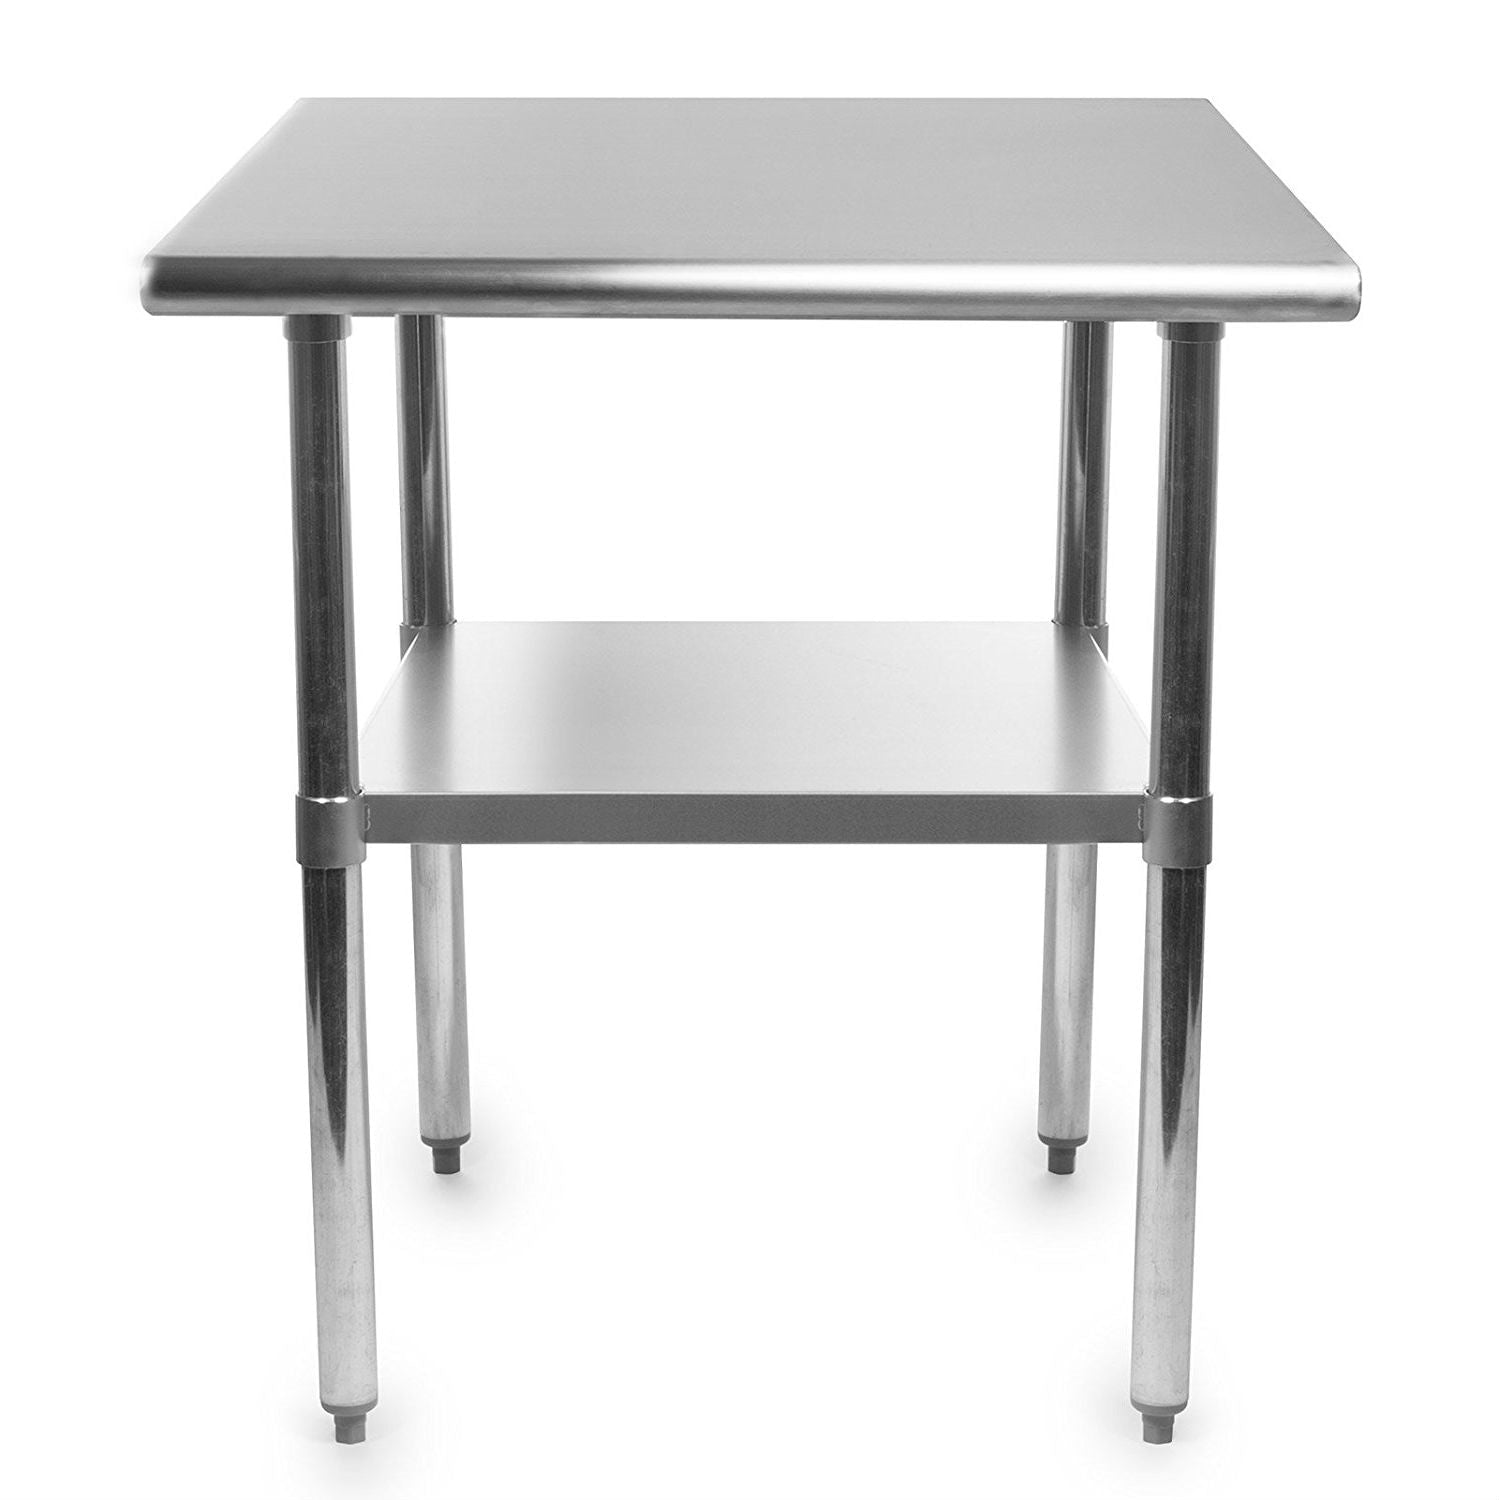 Kitchen > Utility Tables & Workbenches - Heavy Duty Stainless Steel 2 X 3 Ft Kitchen Kitchen Prep Table